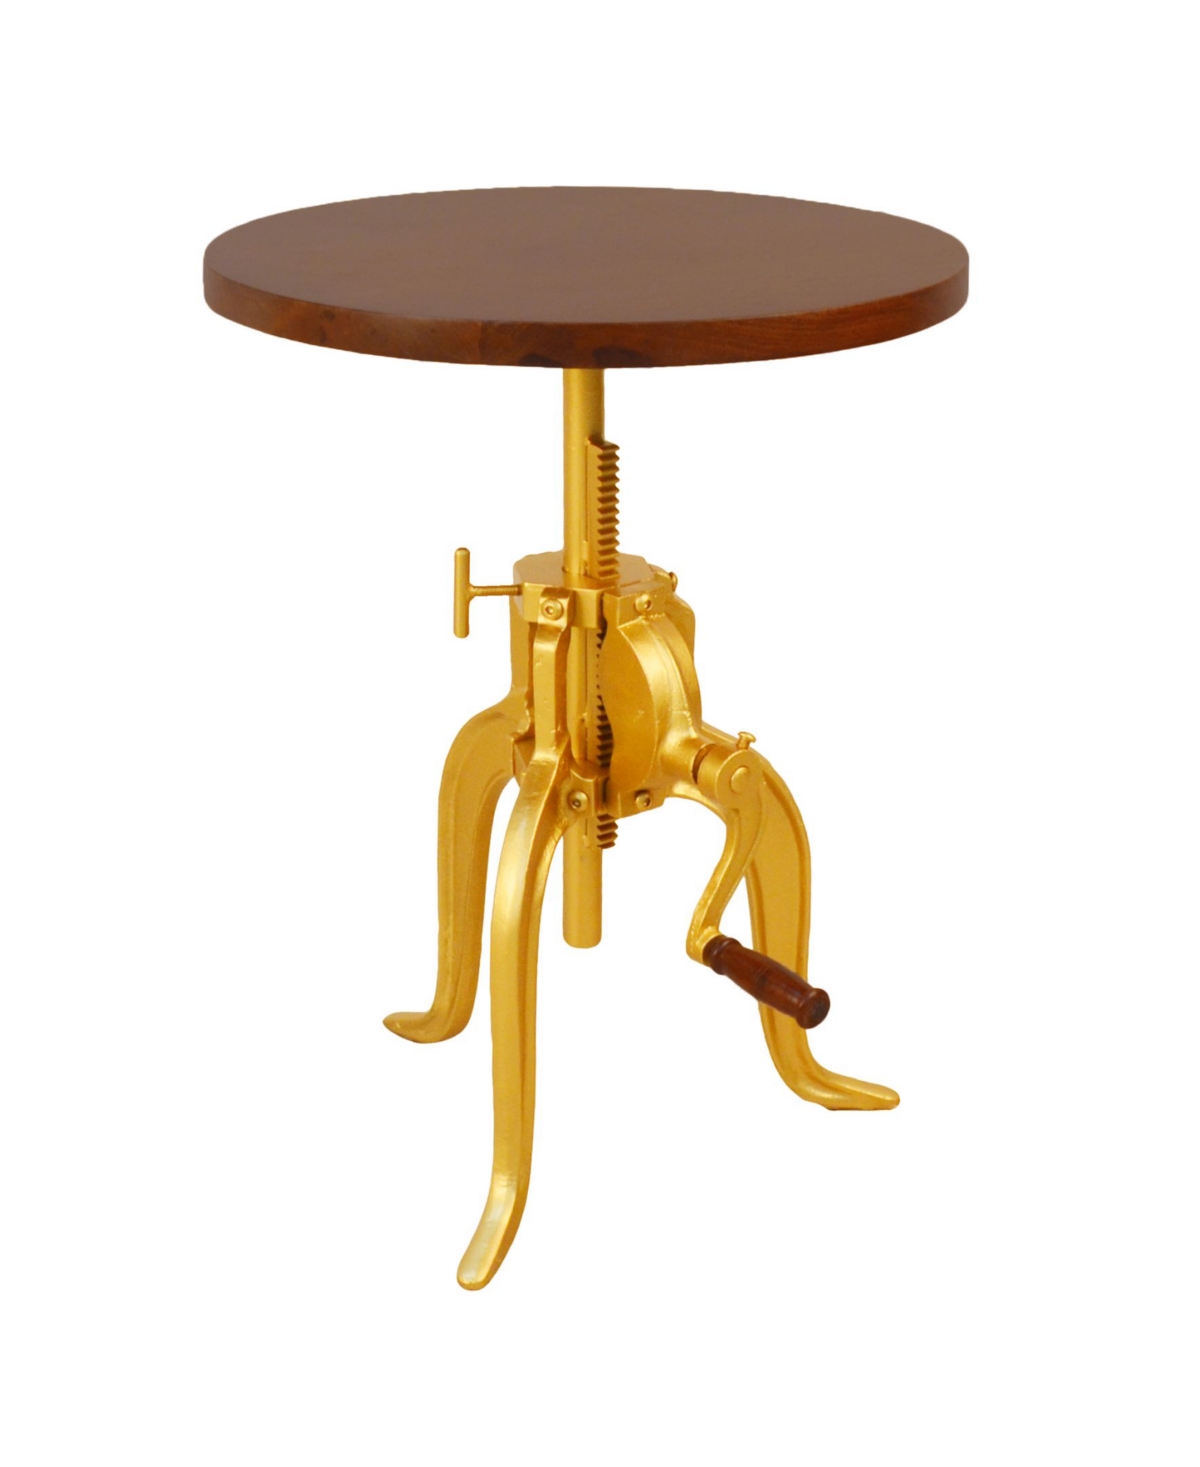 Reilly Adjustable Crank Accent Table